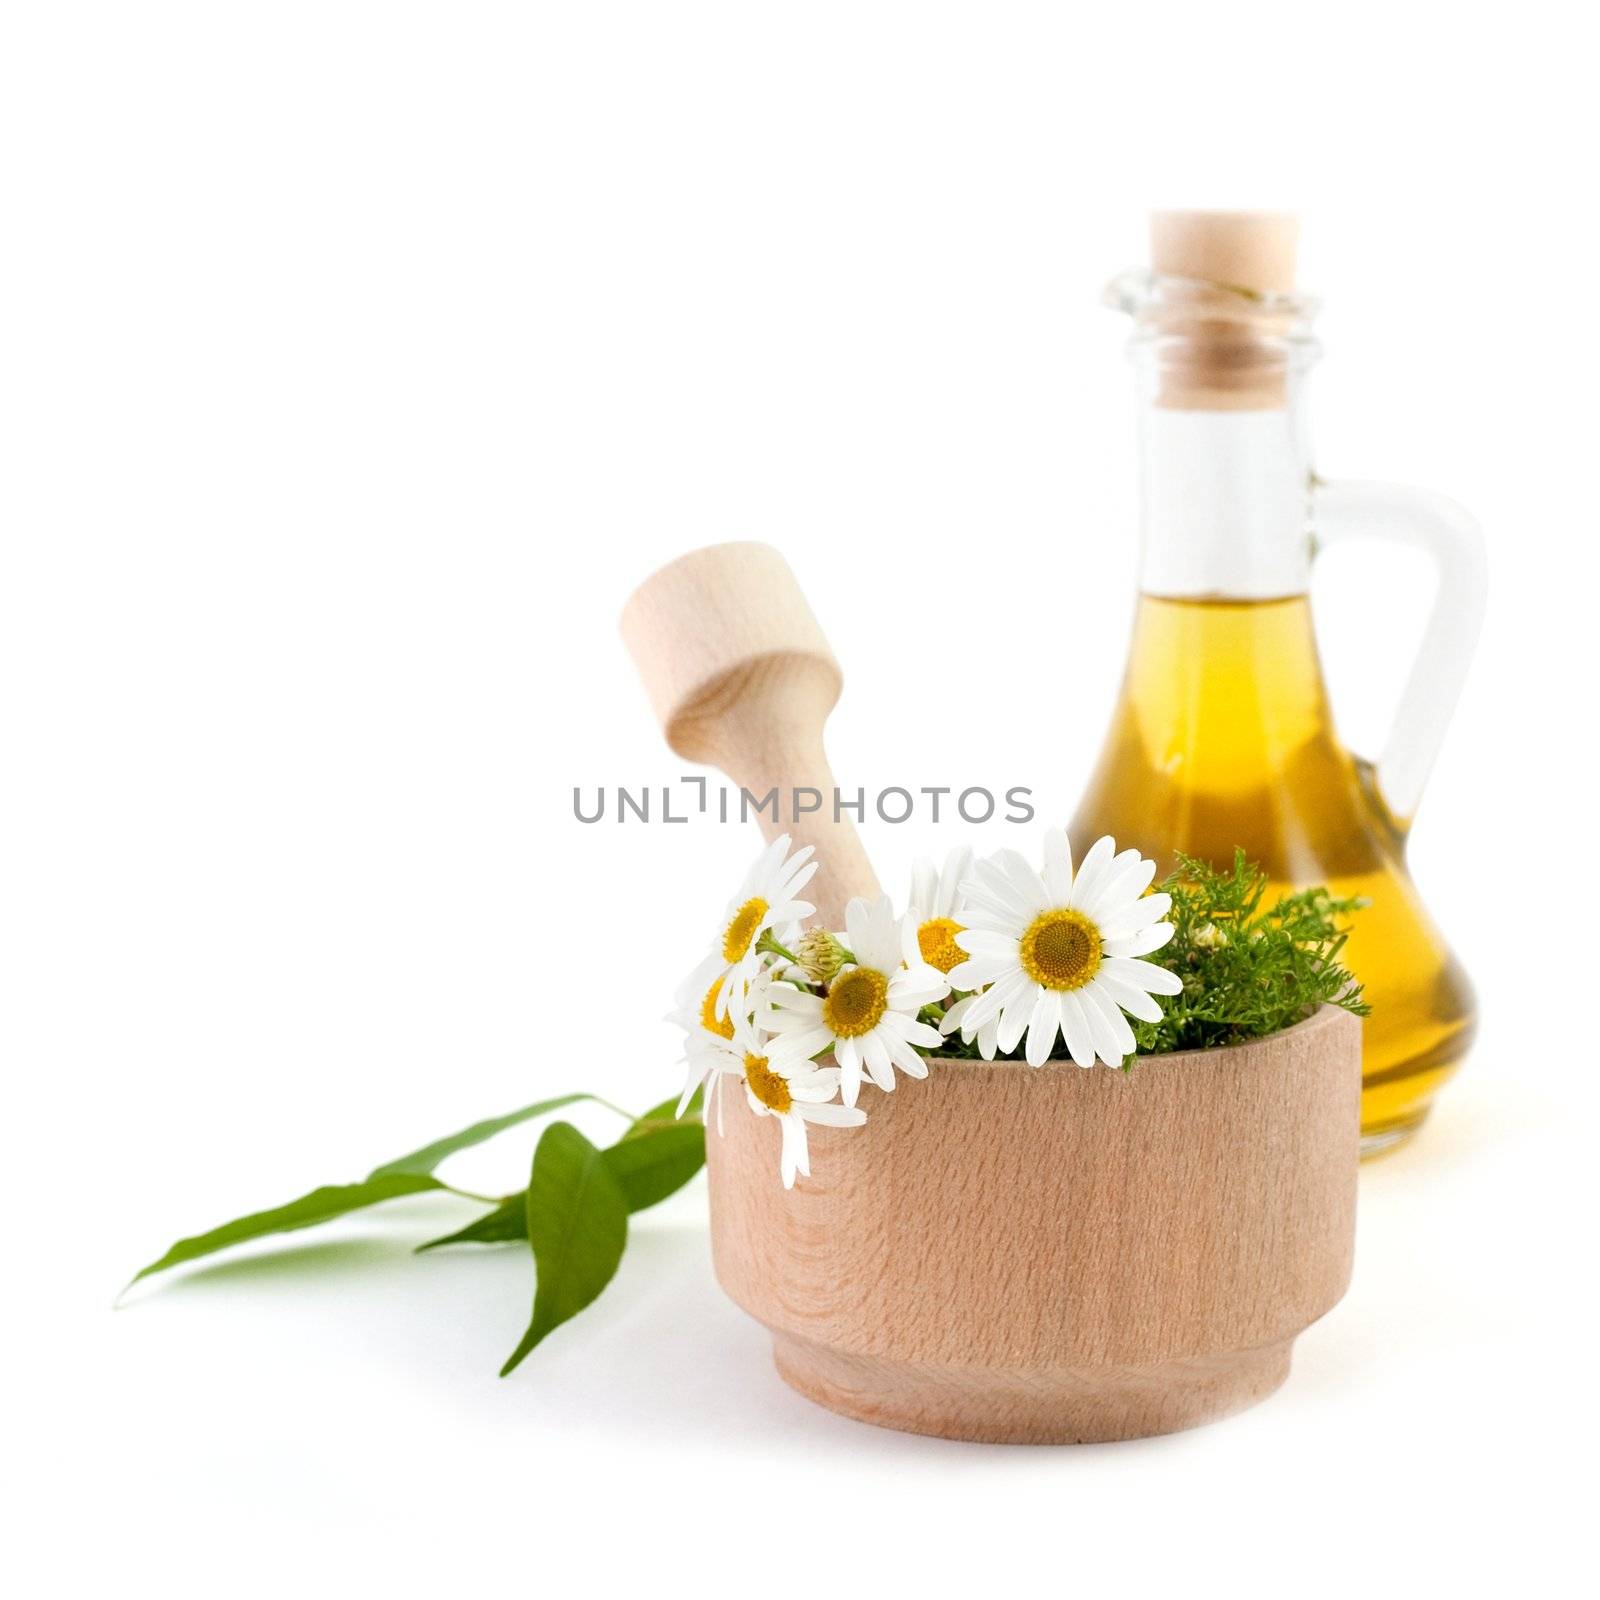 A wooden mortar with flowers in it and a bottle of oil